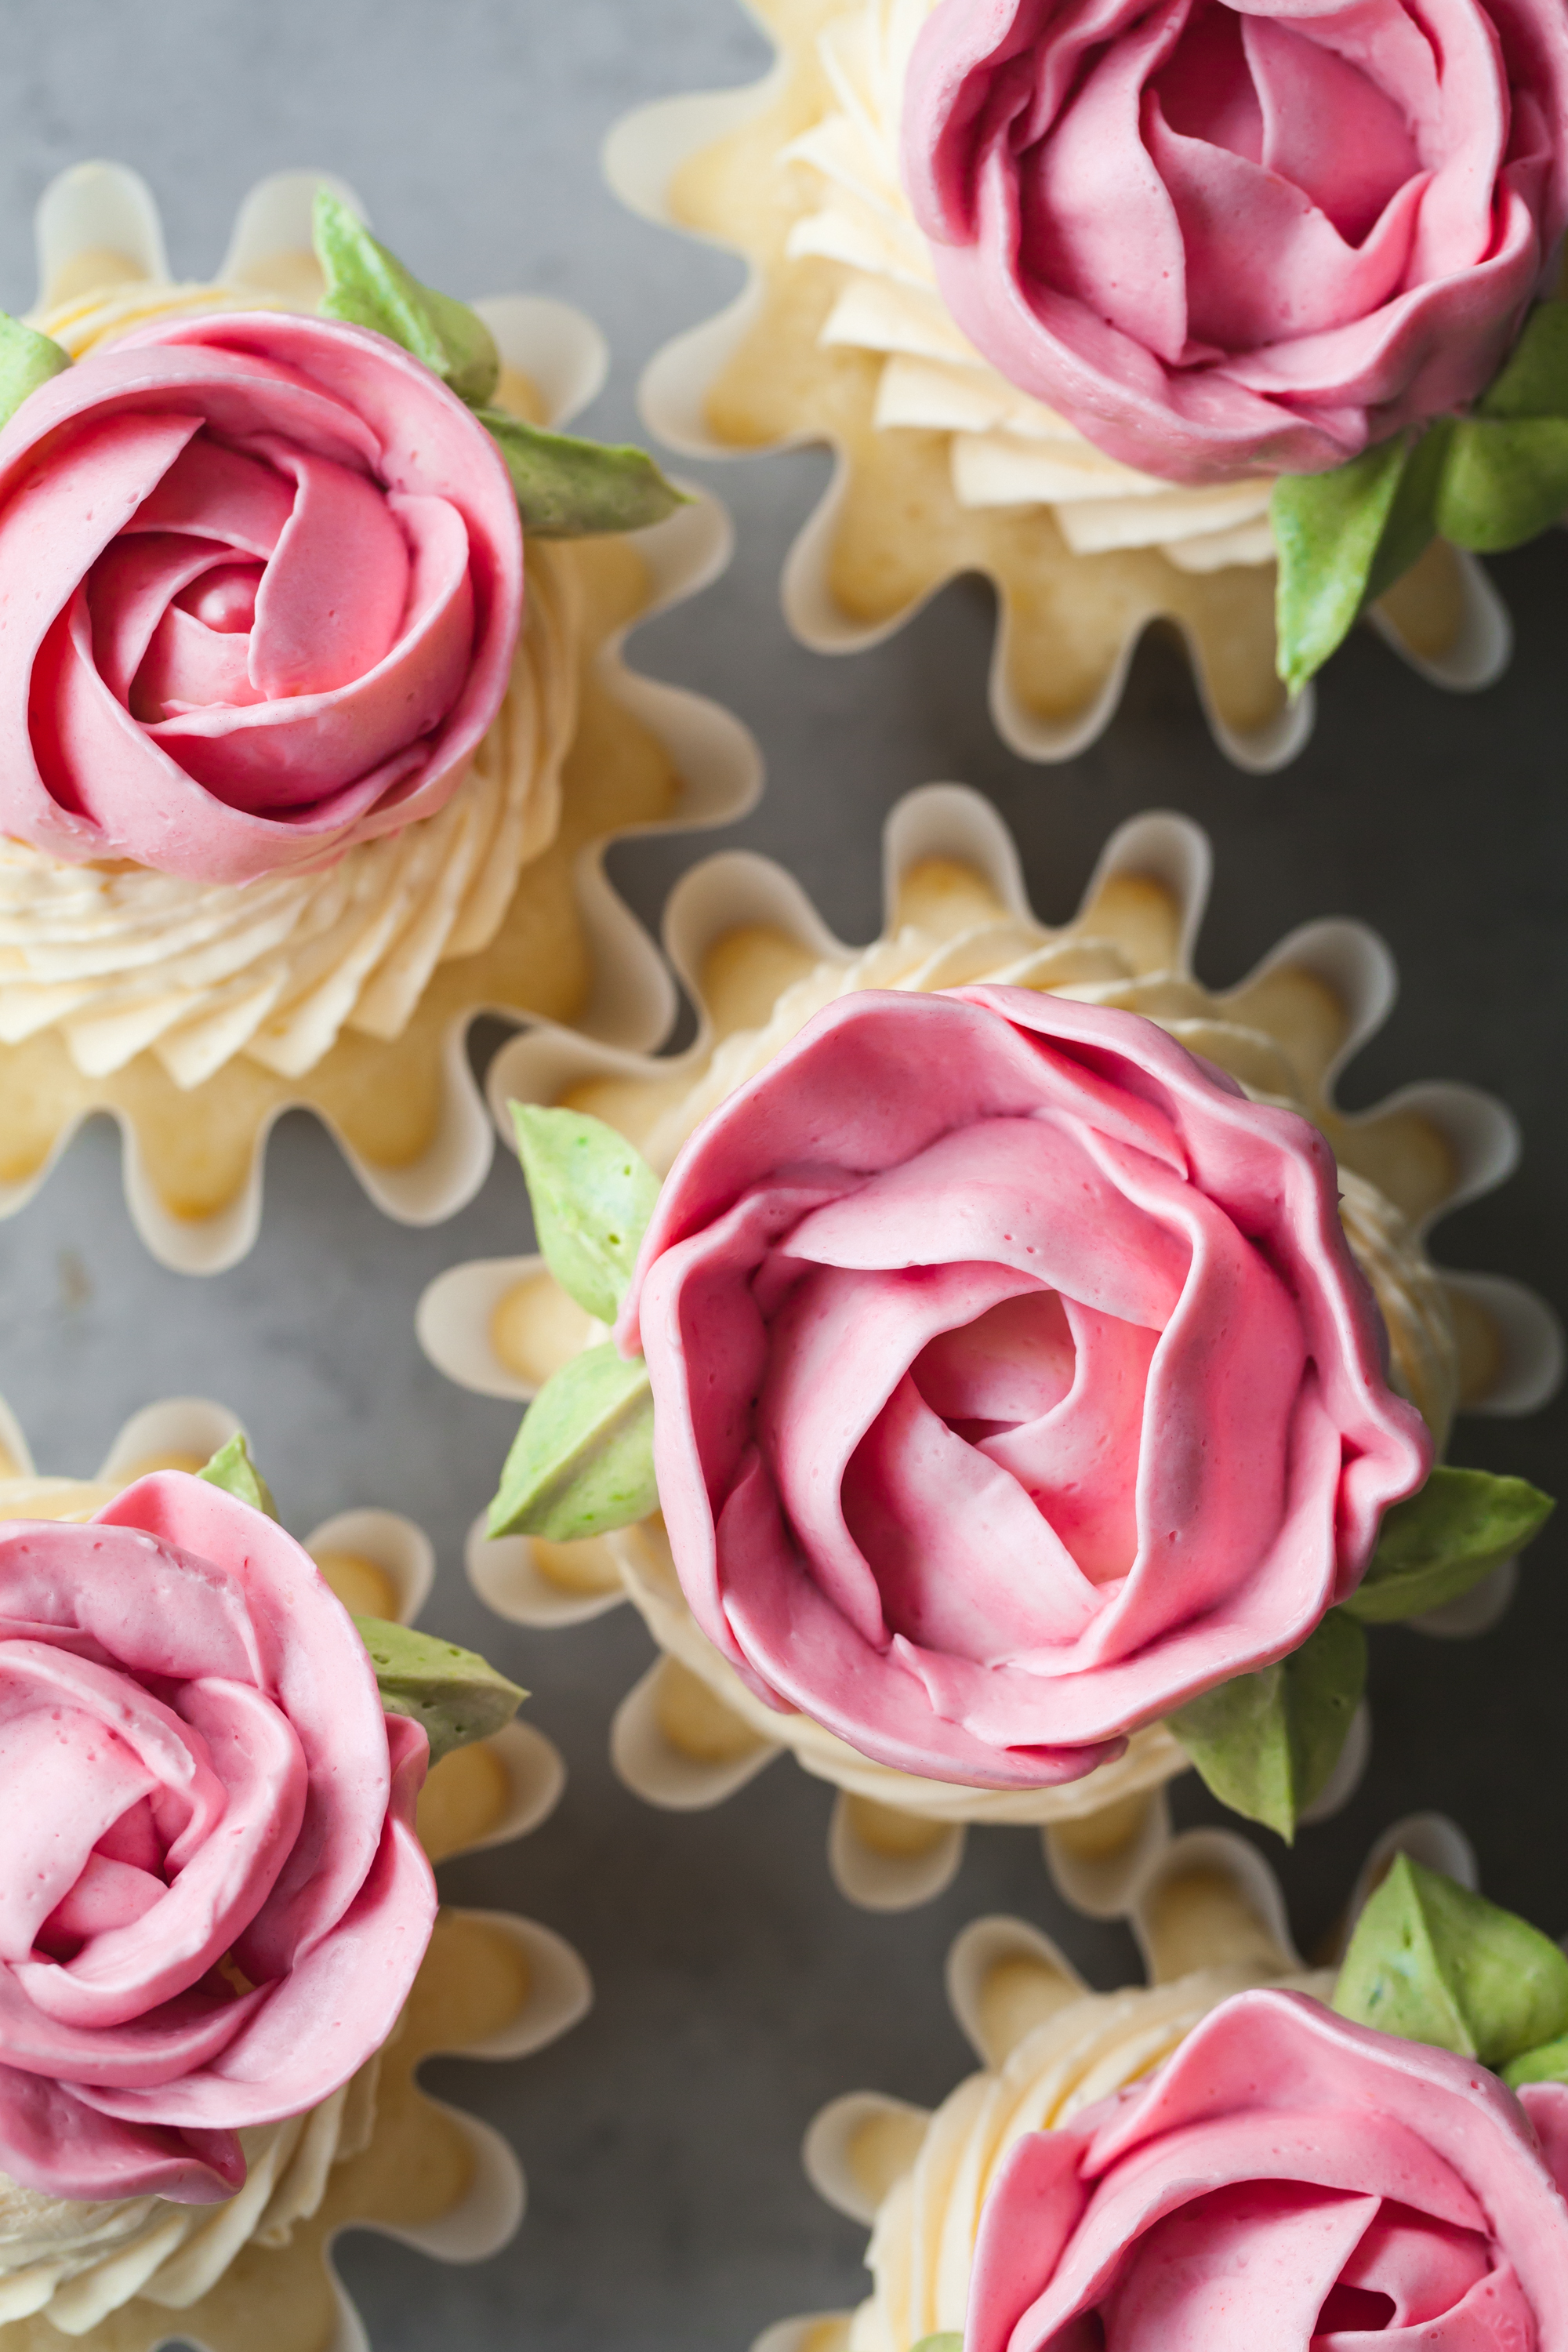 Lemon Passion Fruit Cupcakes with piped peony buttercream flowers